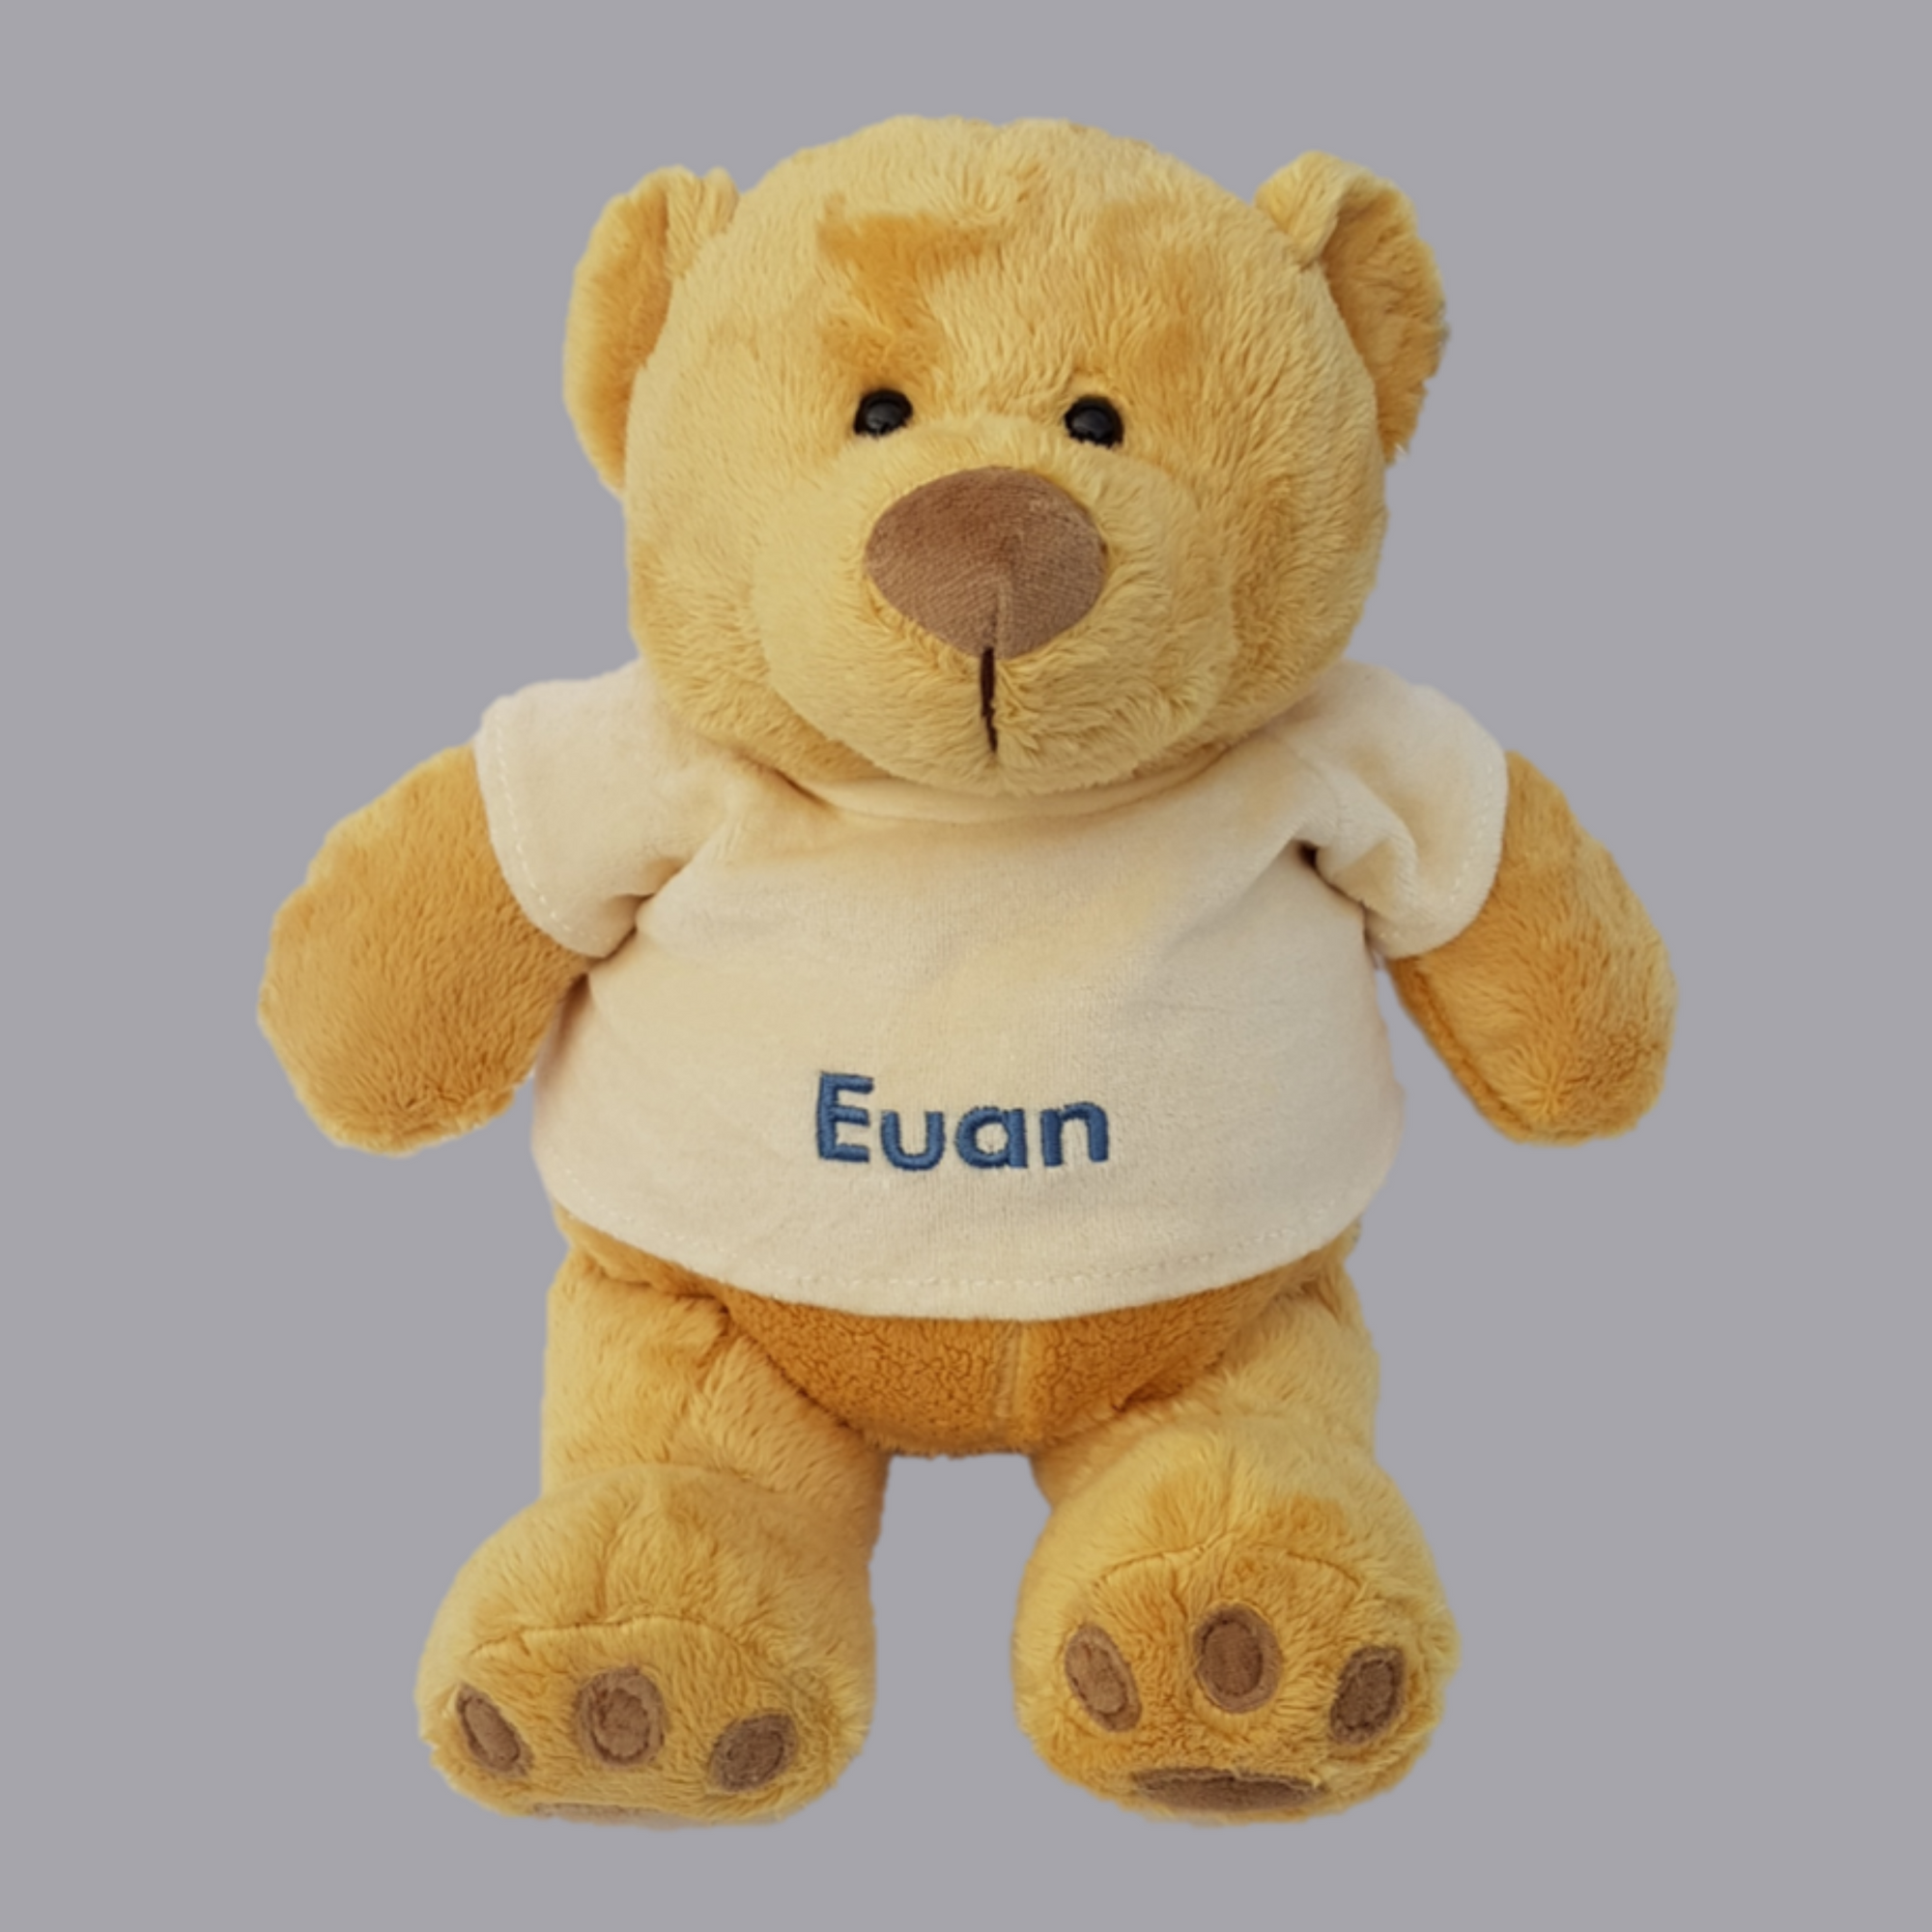 Personalised plush teddy bear. This super soft bear is available in two sizes and he come with a velour cream coloured t-shirt that can be personalised with a name of your choice in a range of colours.